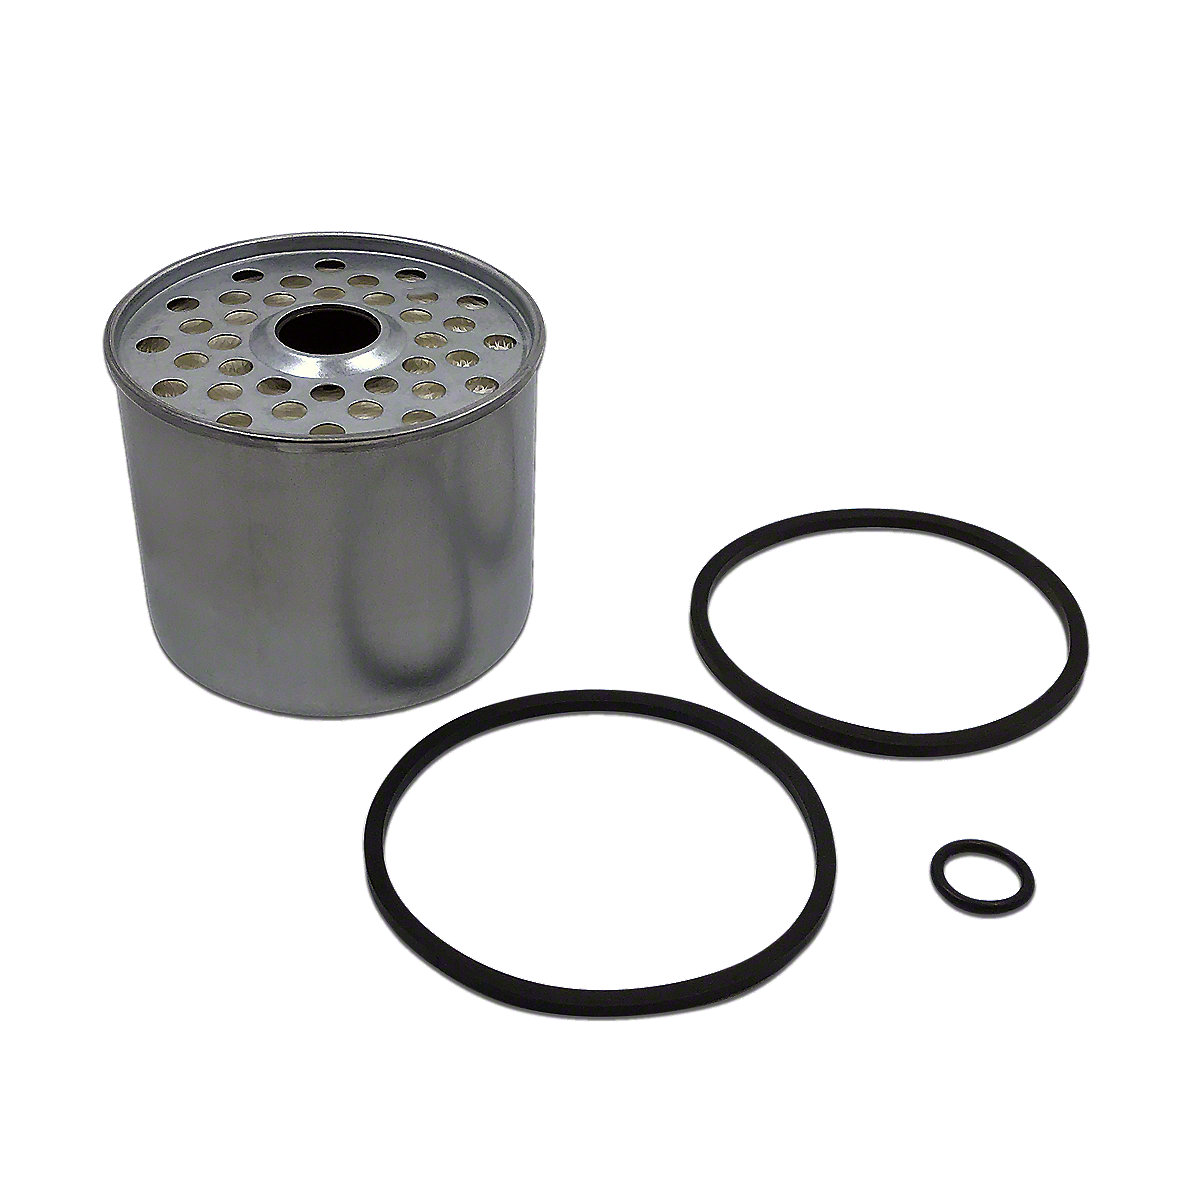 Fuel Filter Element with seals for CavSimms fuel filters